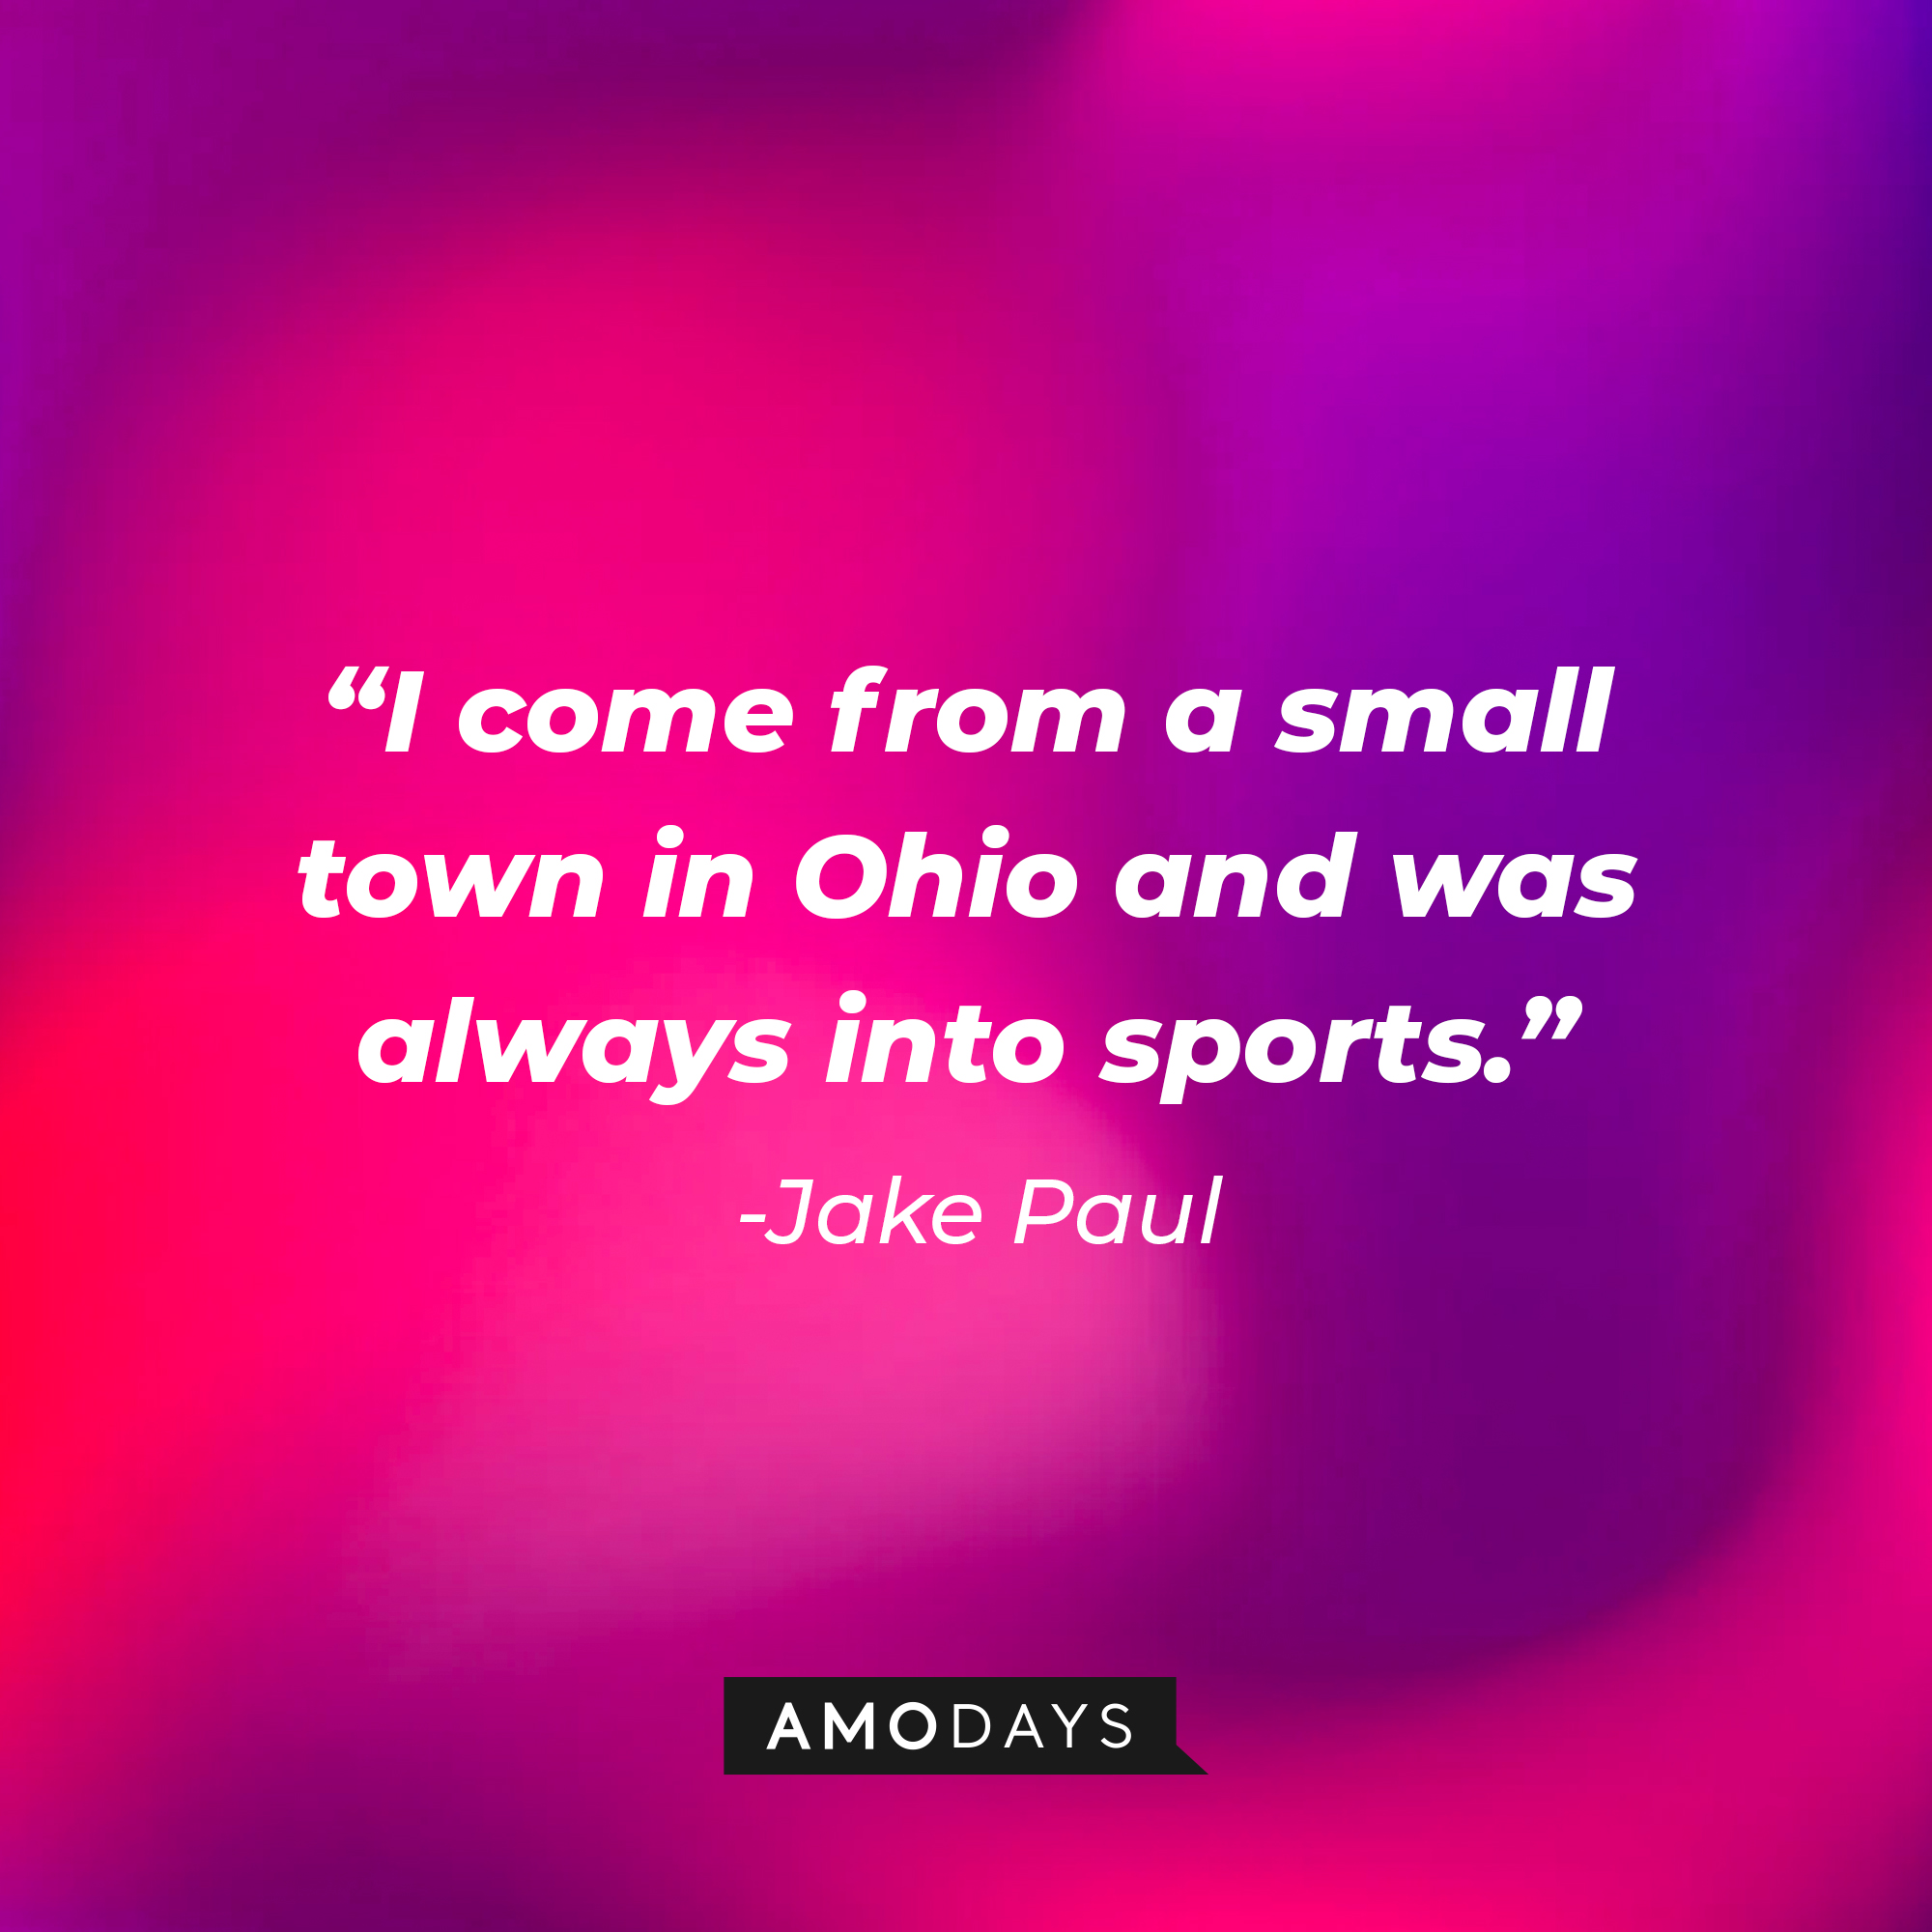 Jake Paul’s quote: "I come from a small town in Ohio and was always into sports." | Image: Amodays